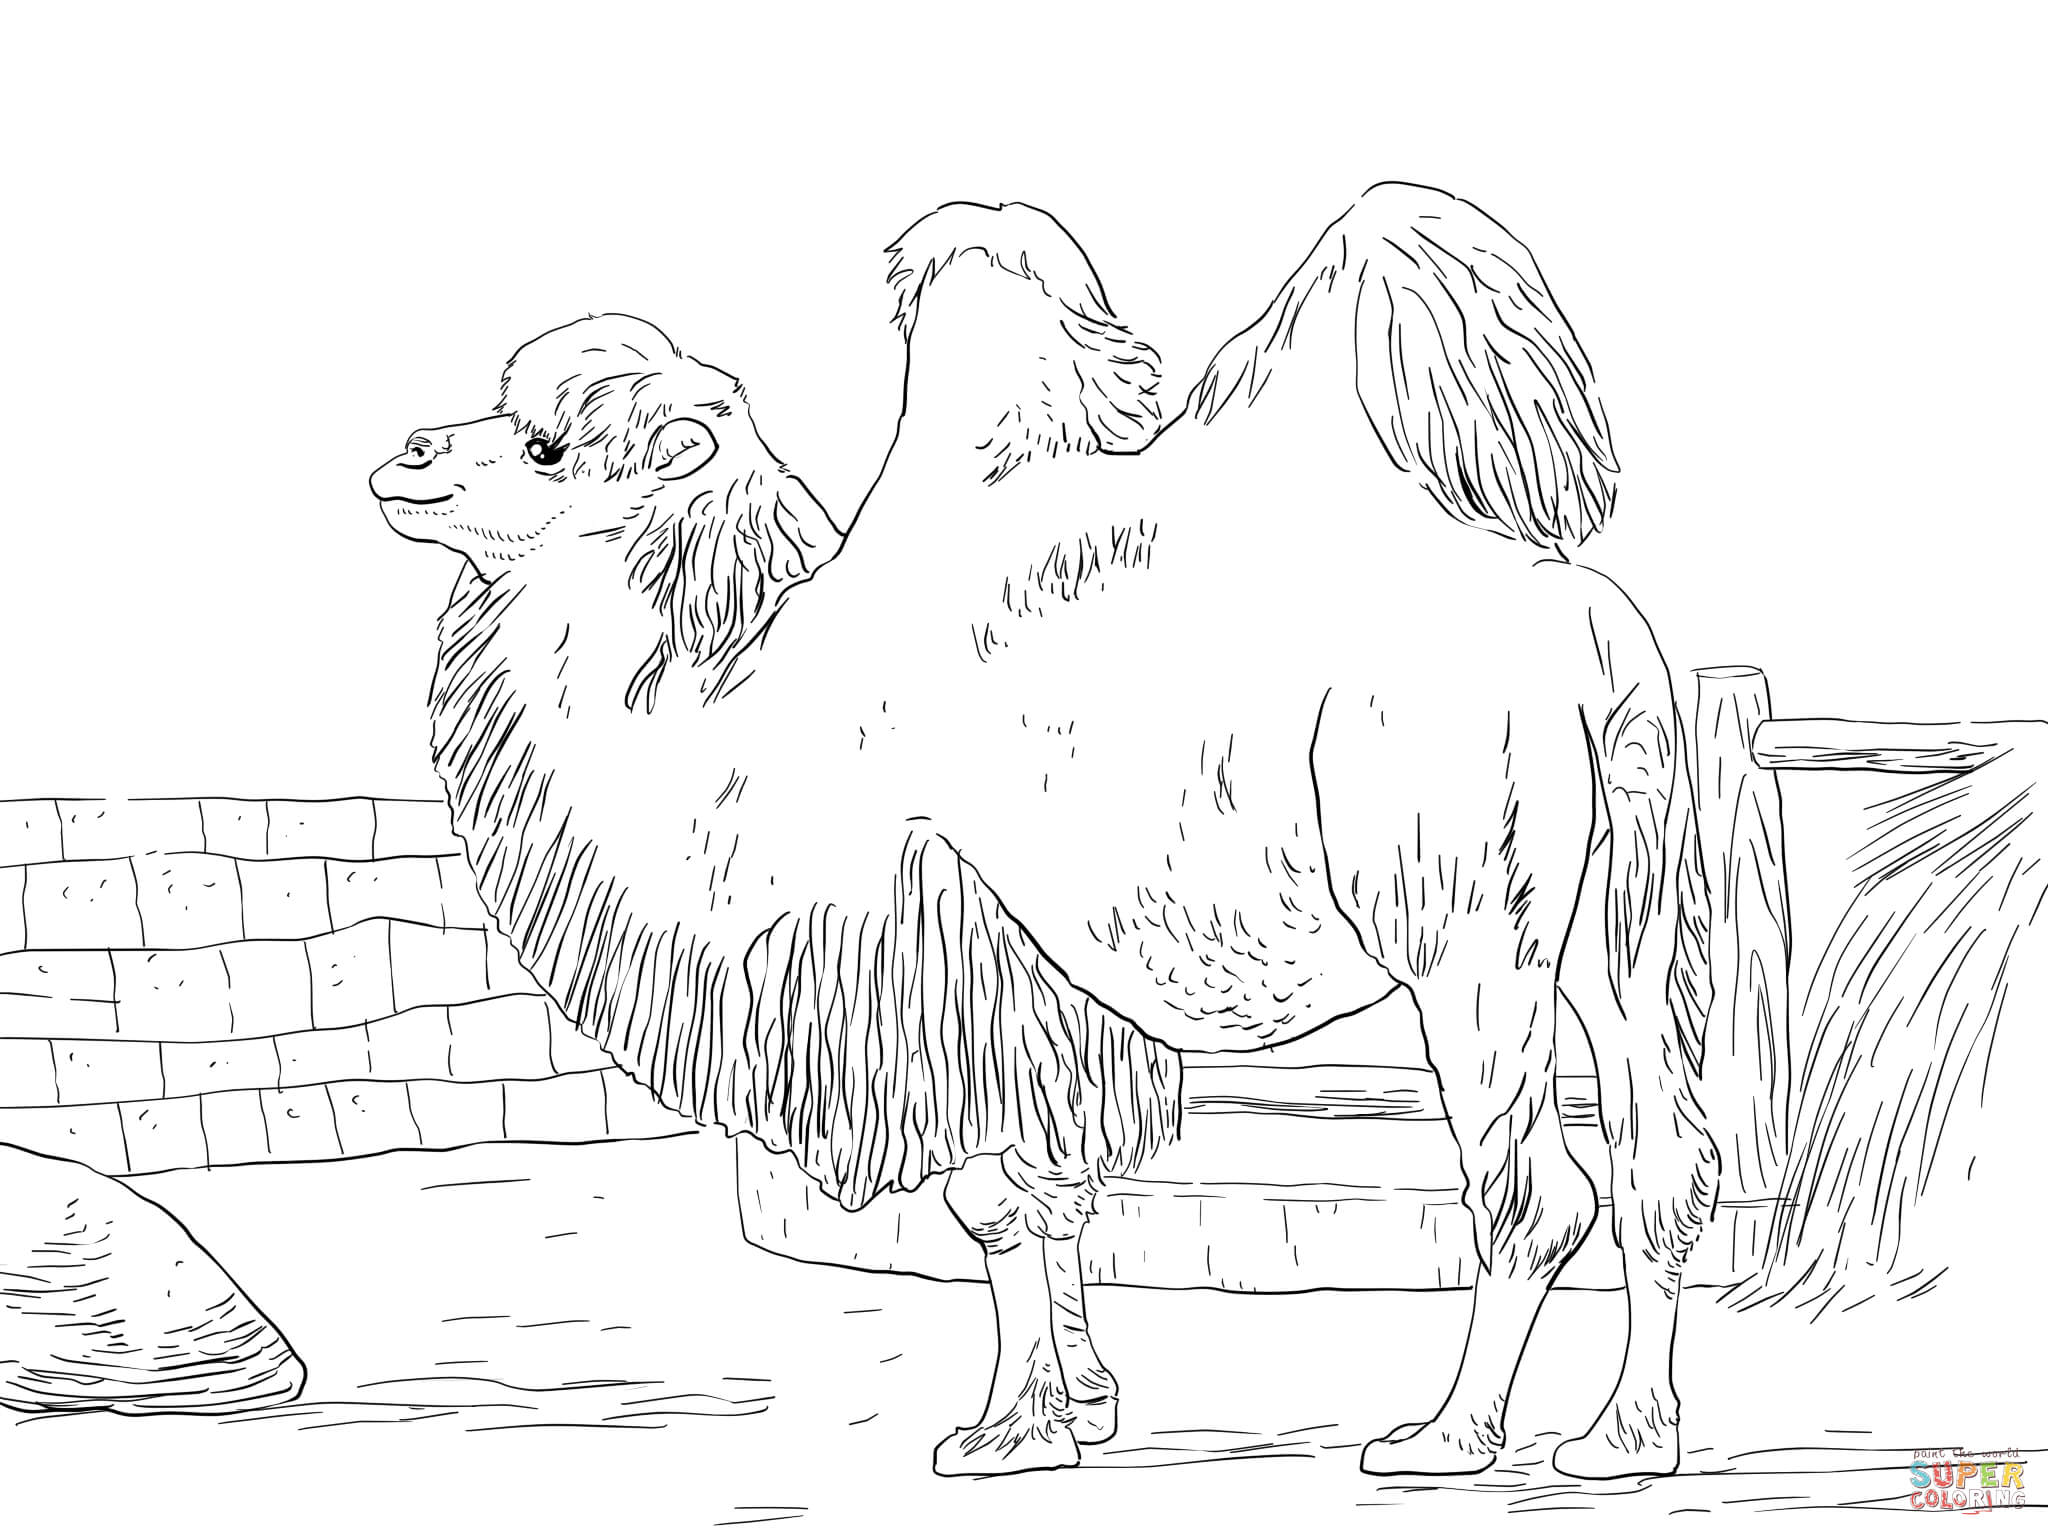 Camels coloring pages | Free Coloring Pages